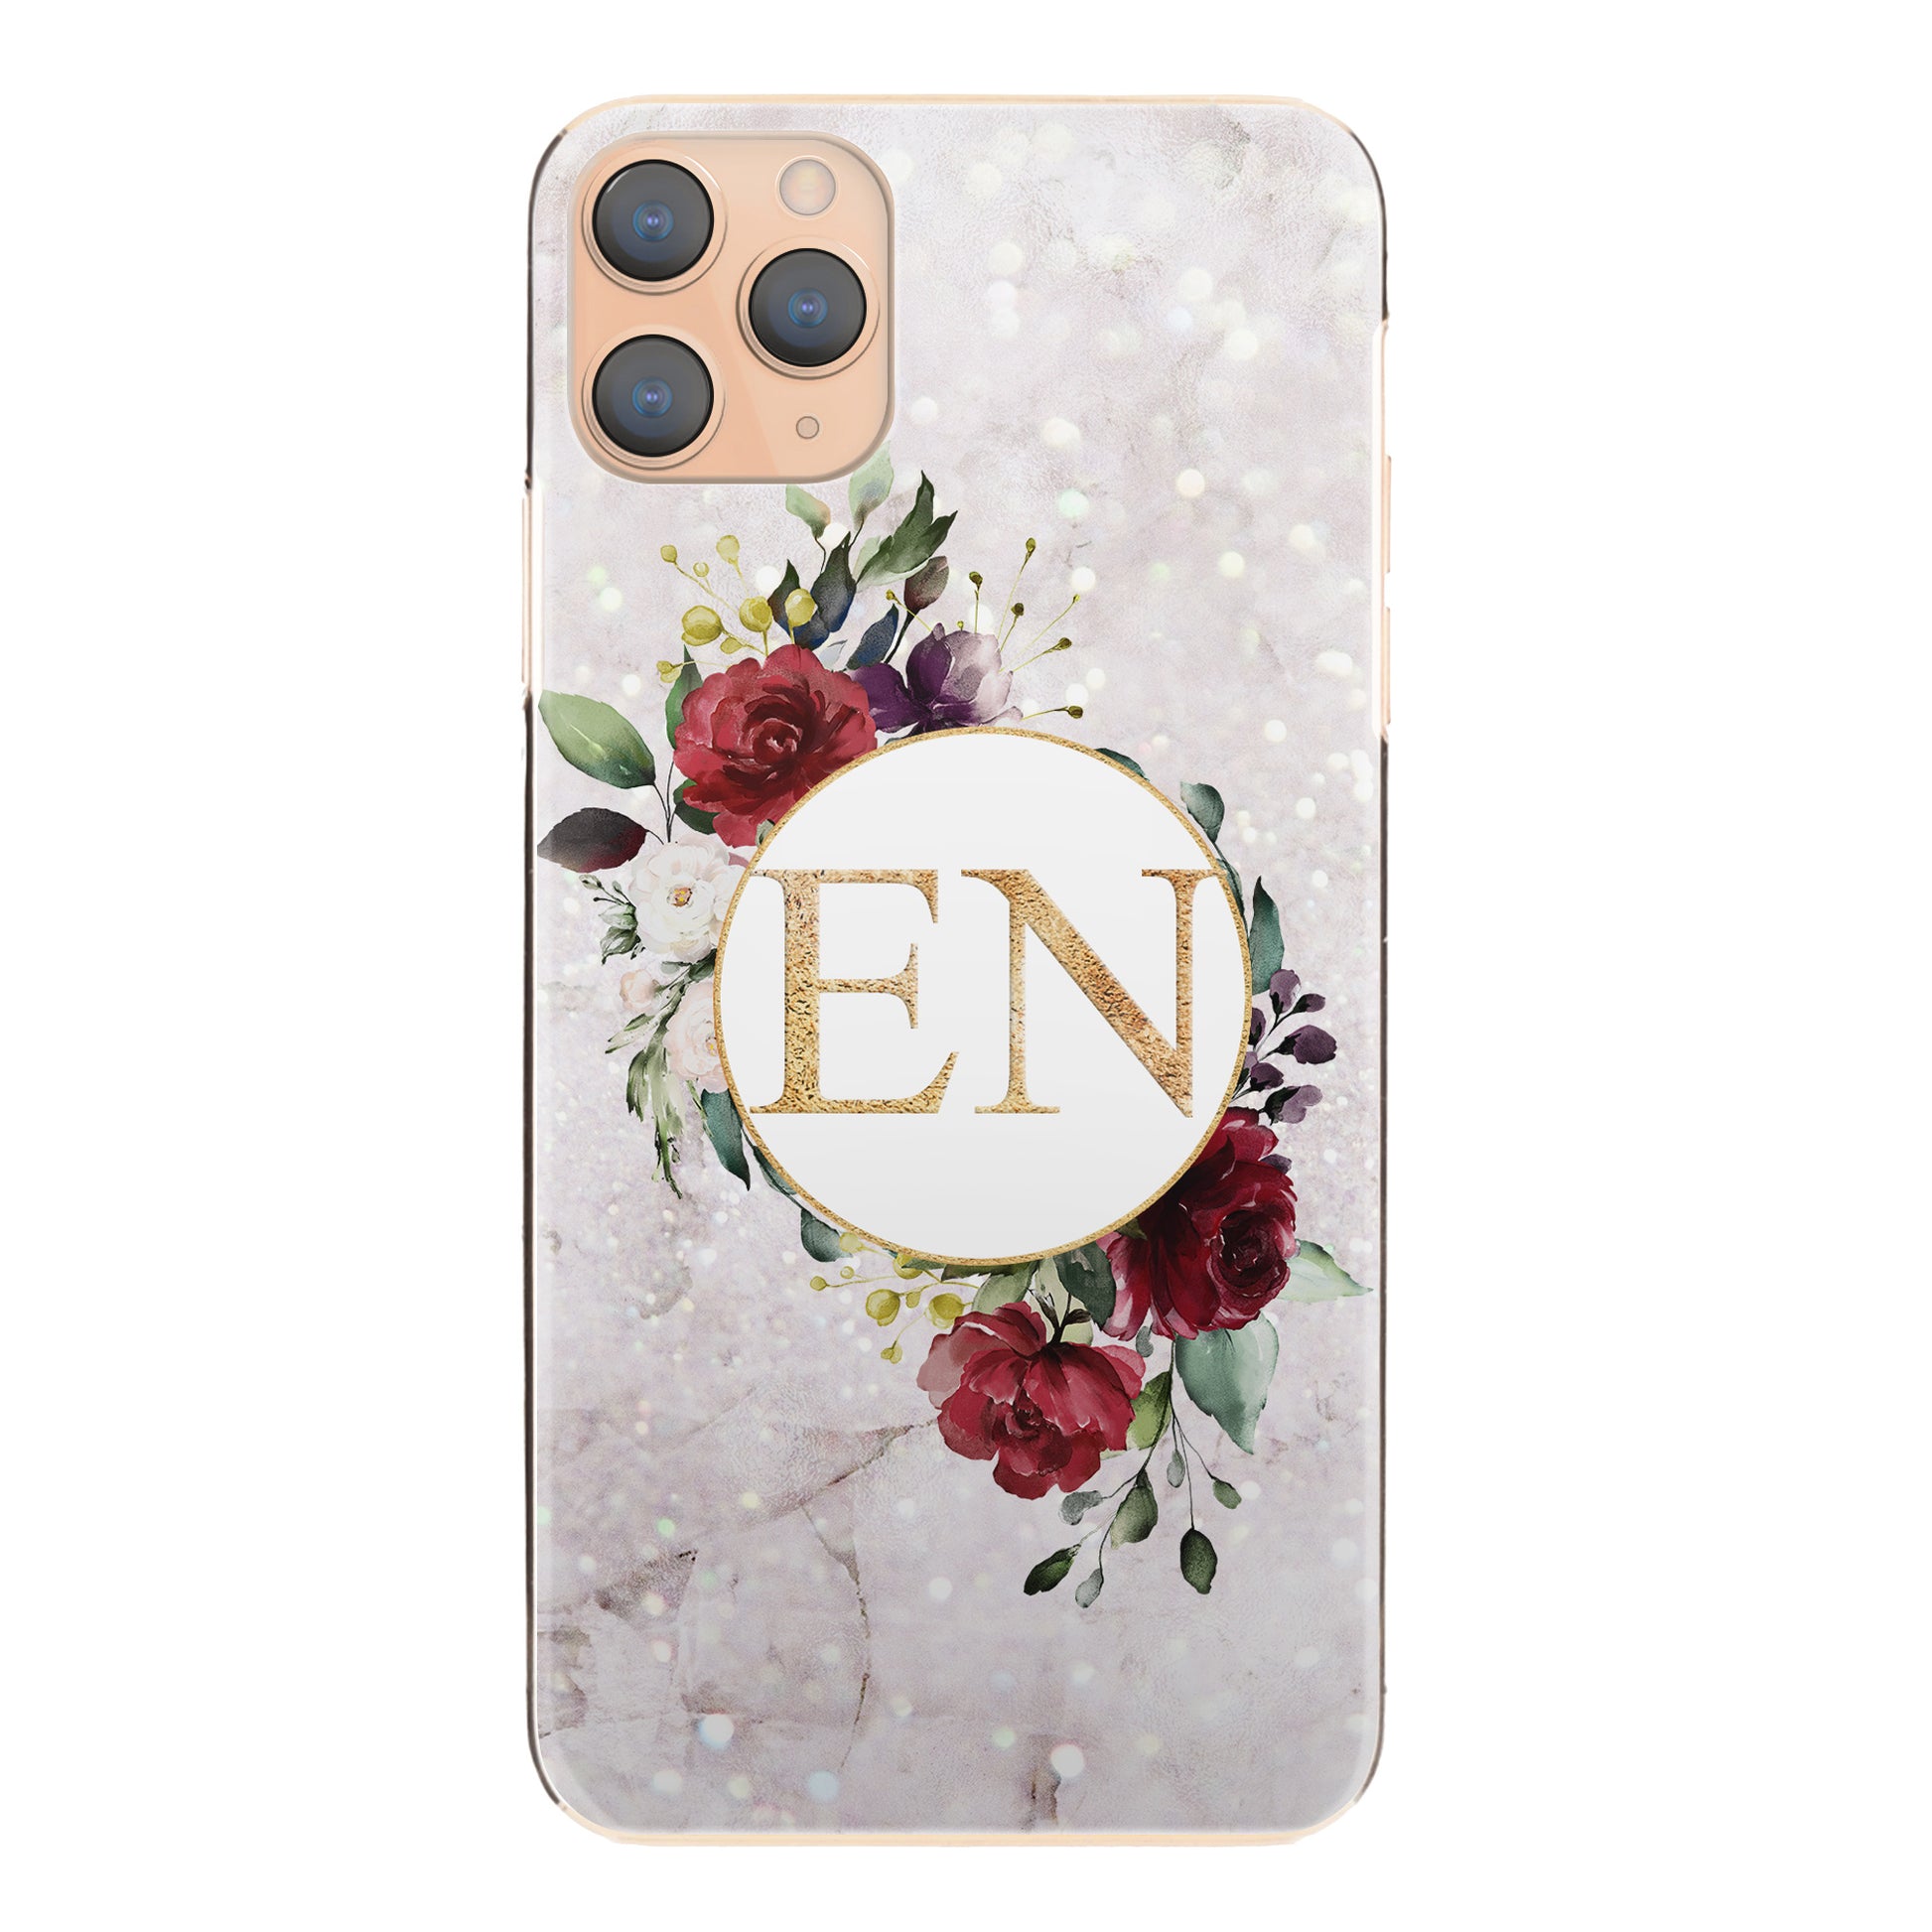 Personalised Xiaomi Phone Hard Case with Floral Gold Initials on Crystal Marble